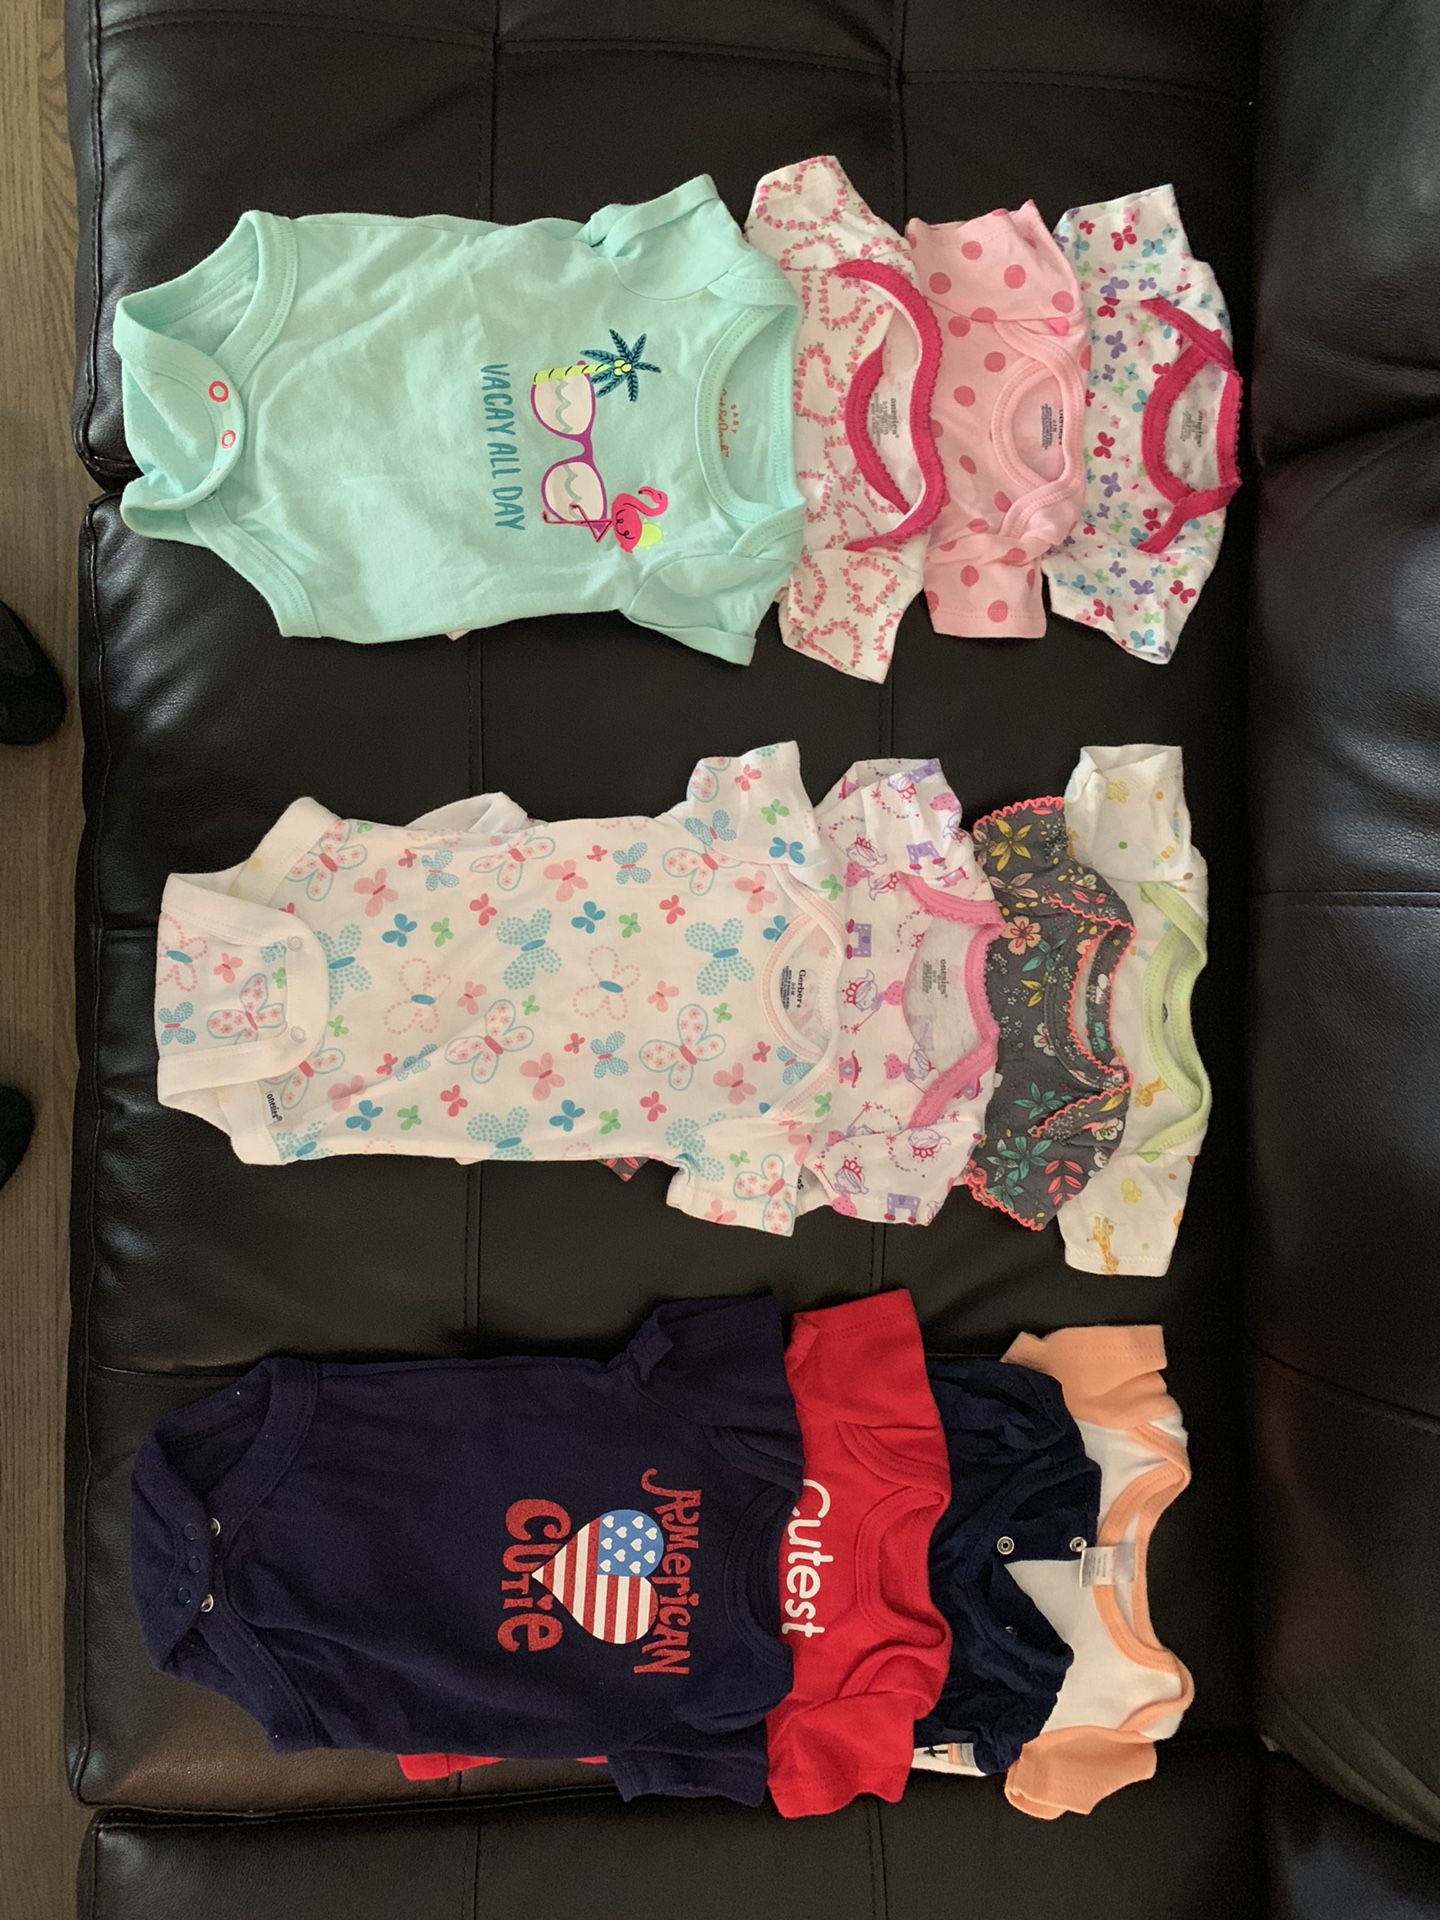 Lightly worn baby girl clothes. Onesies, sleepers, sweaters, dresses, and shoes. Clothes sizes 0-12 months and shoes sizes 1 & 2.